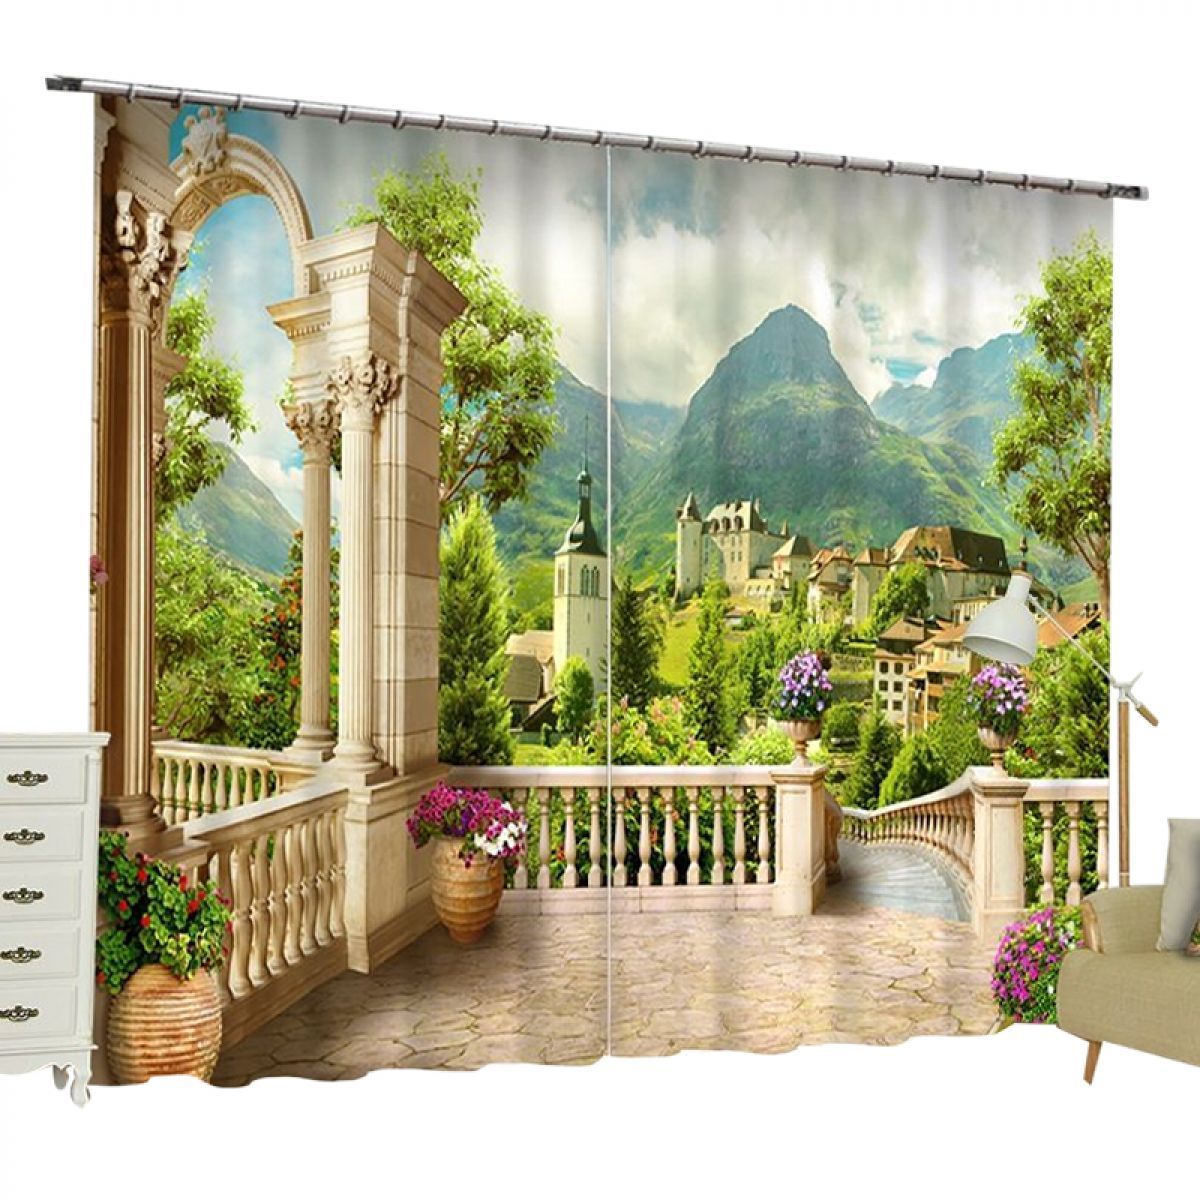 european garden and building view printed window curtain home decor 6825